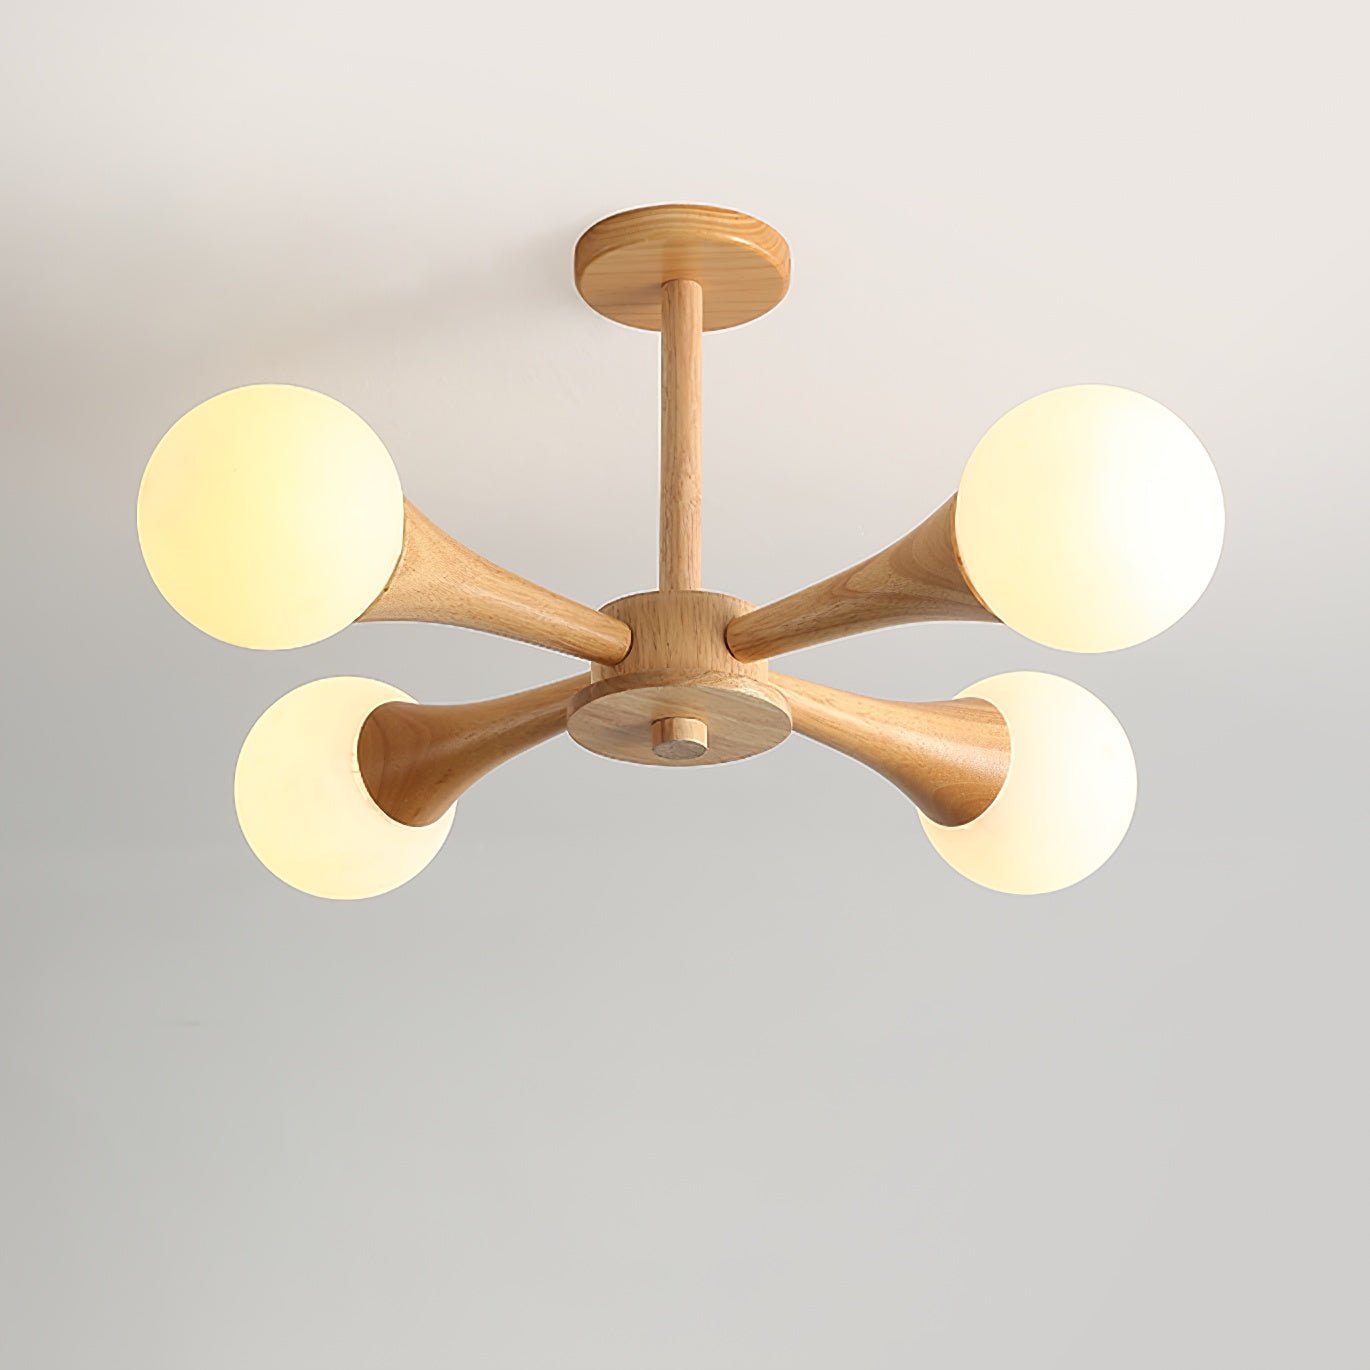 Wooden Nera Chandelier with 4 Heads, 19.6" Diameter x 11.8" Height, 50cm Diameter x 30cm Height, Wood and White Color